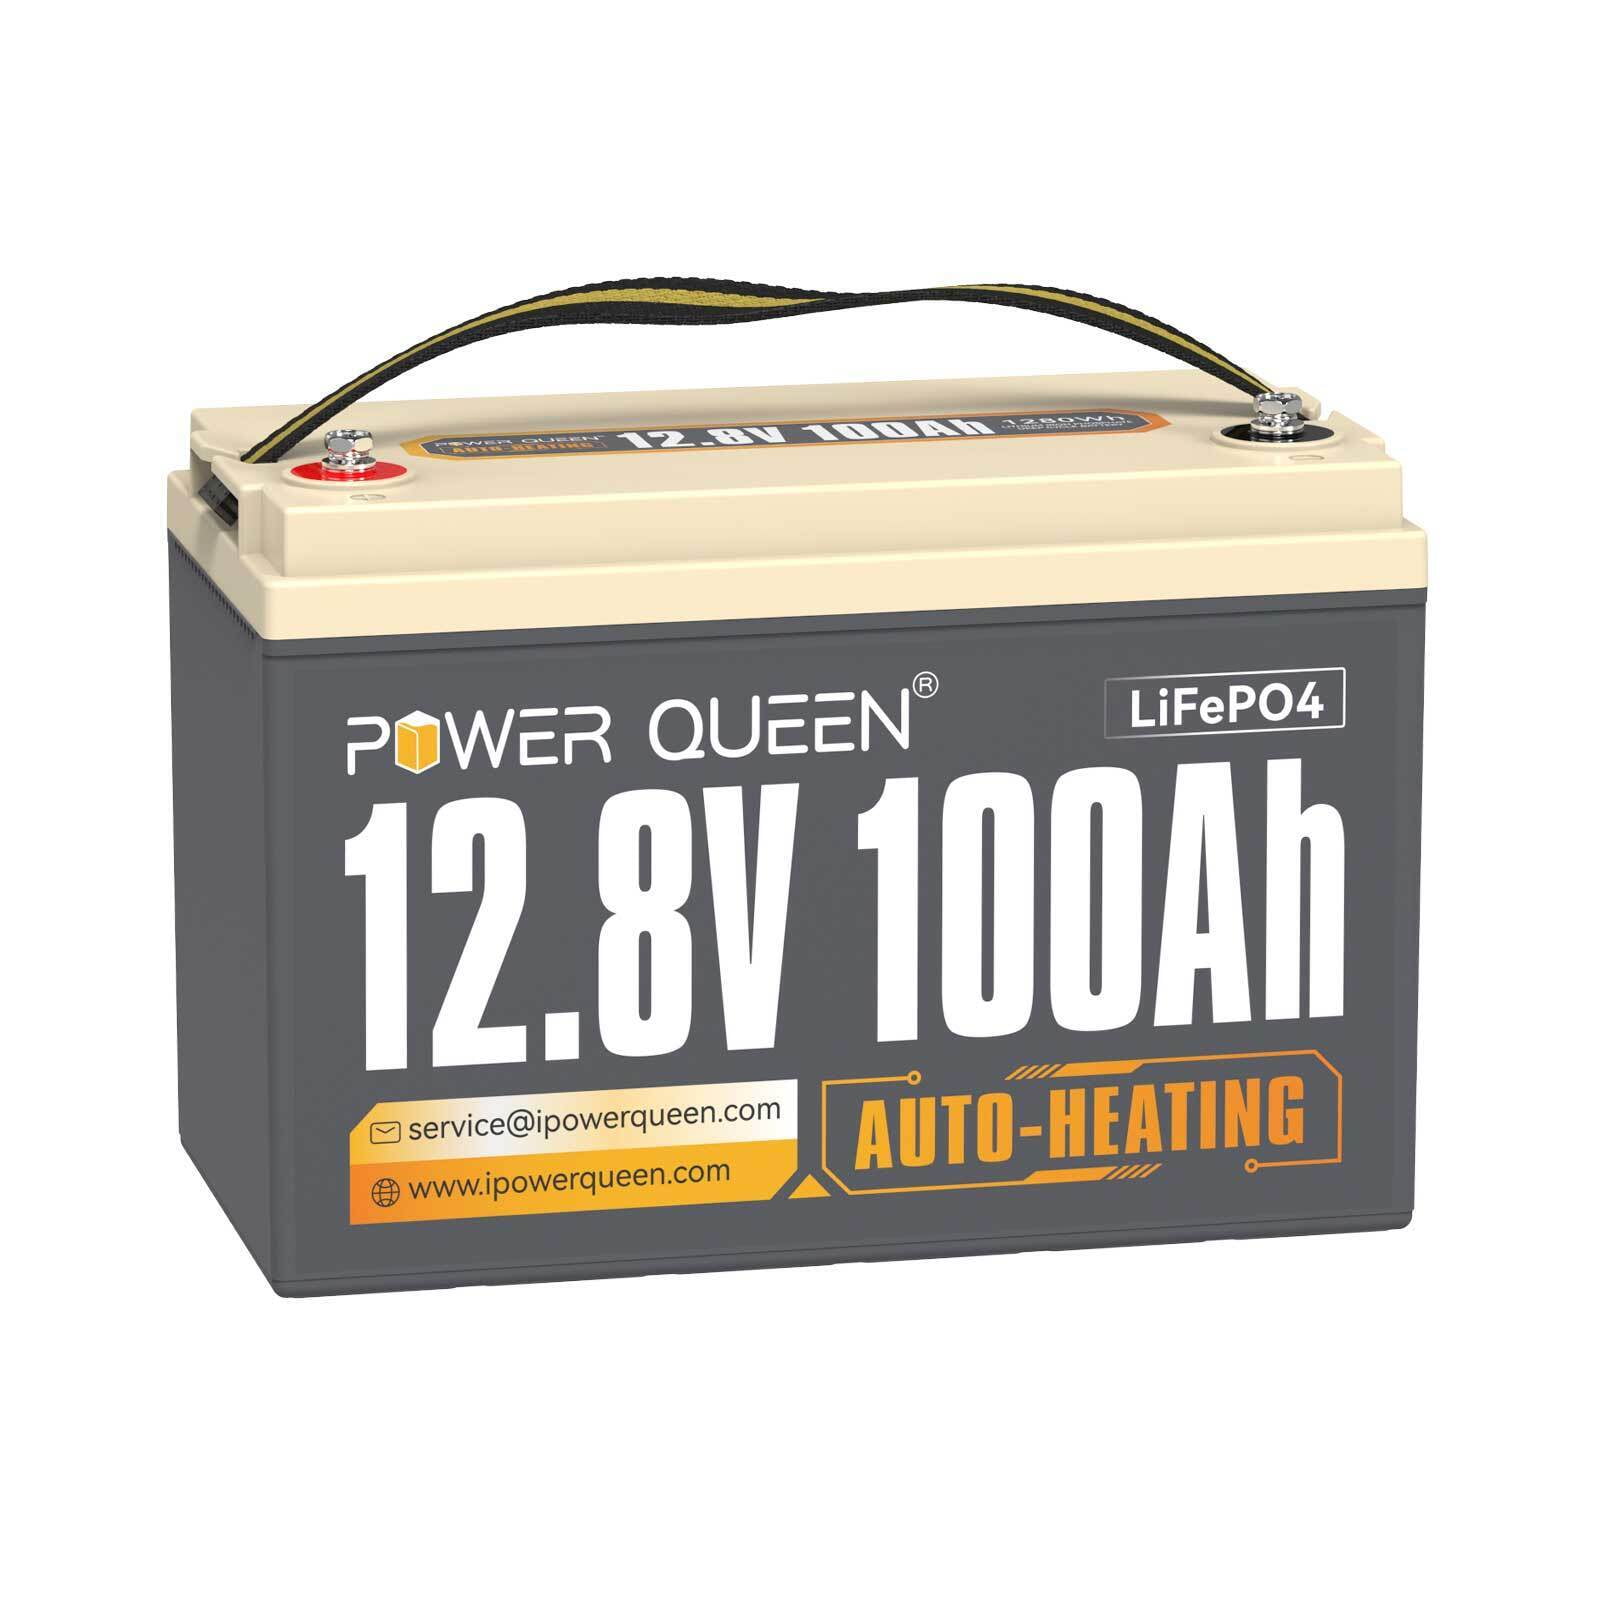 Power Queen 12V 100Ah Auto-Heating LiFePO4 Lithium Battery BMS Support Low  Temp. for RV, off-Grid，Match BCI Group 31 Battery Box 